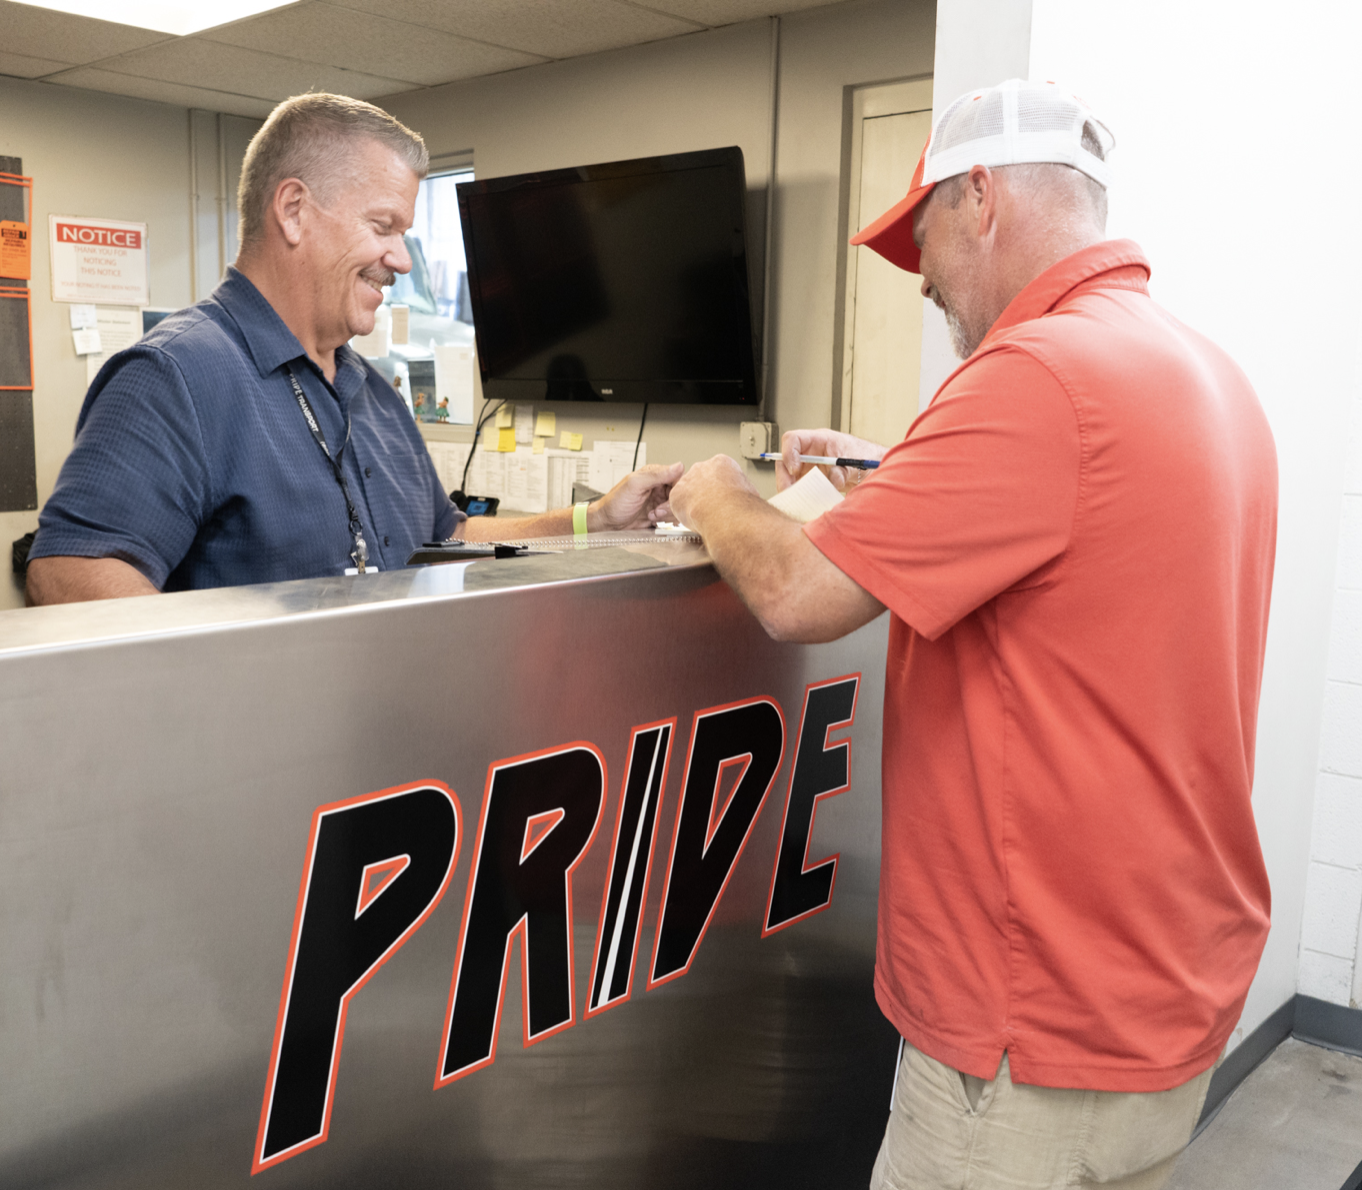 Pride Transport employee behind a counter helping another gentleman